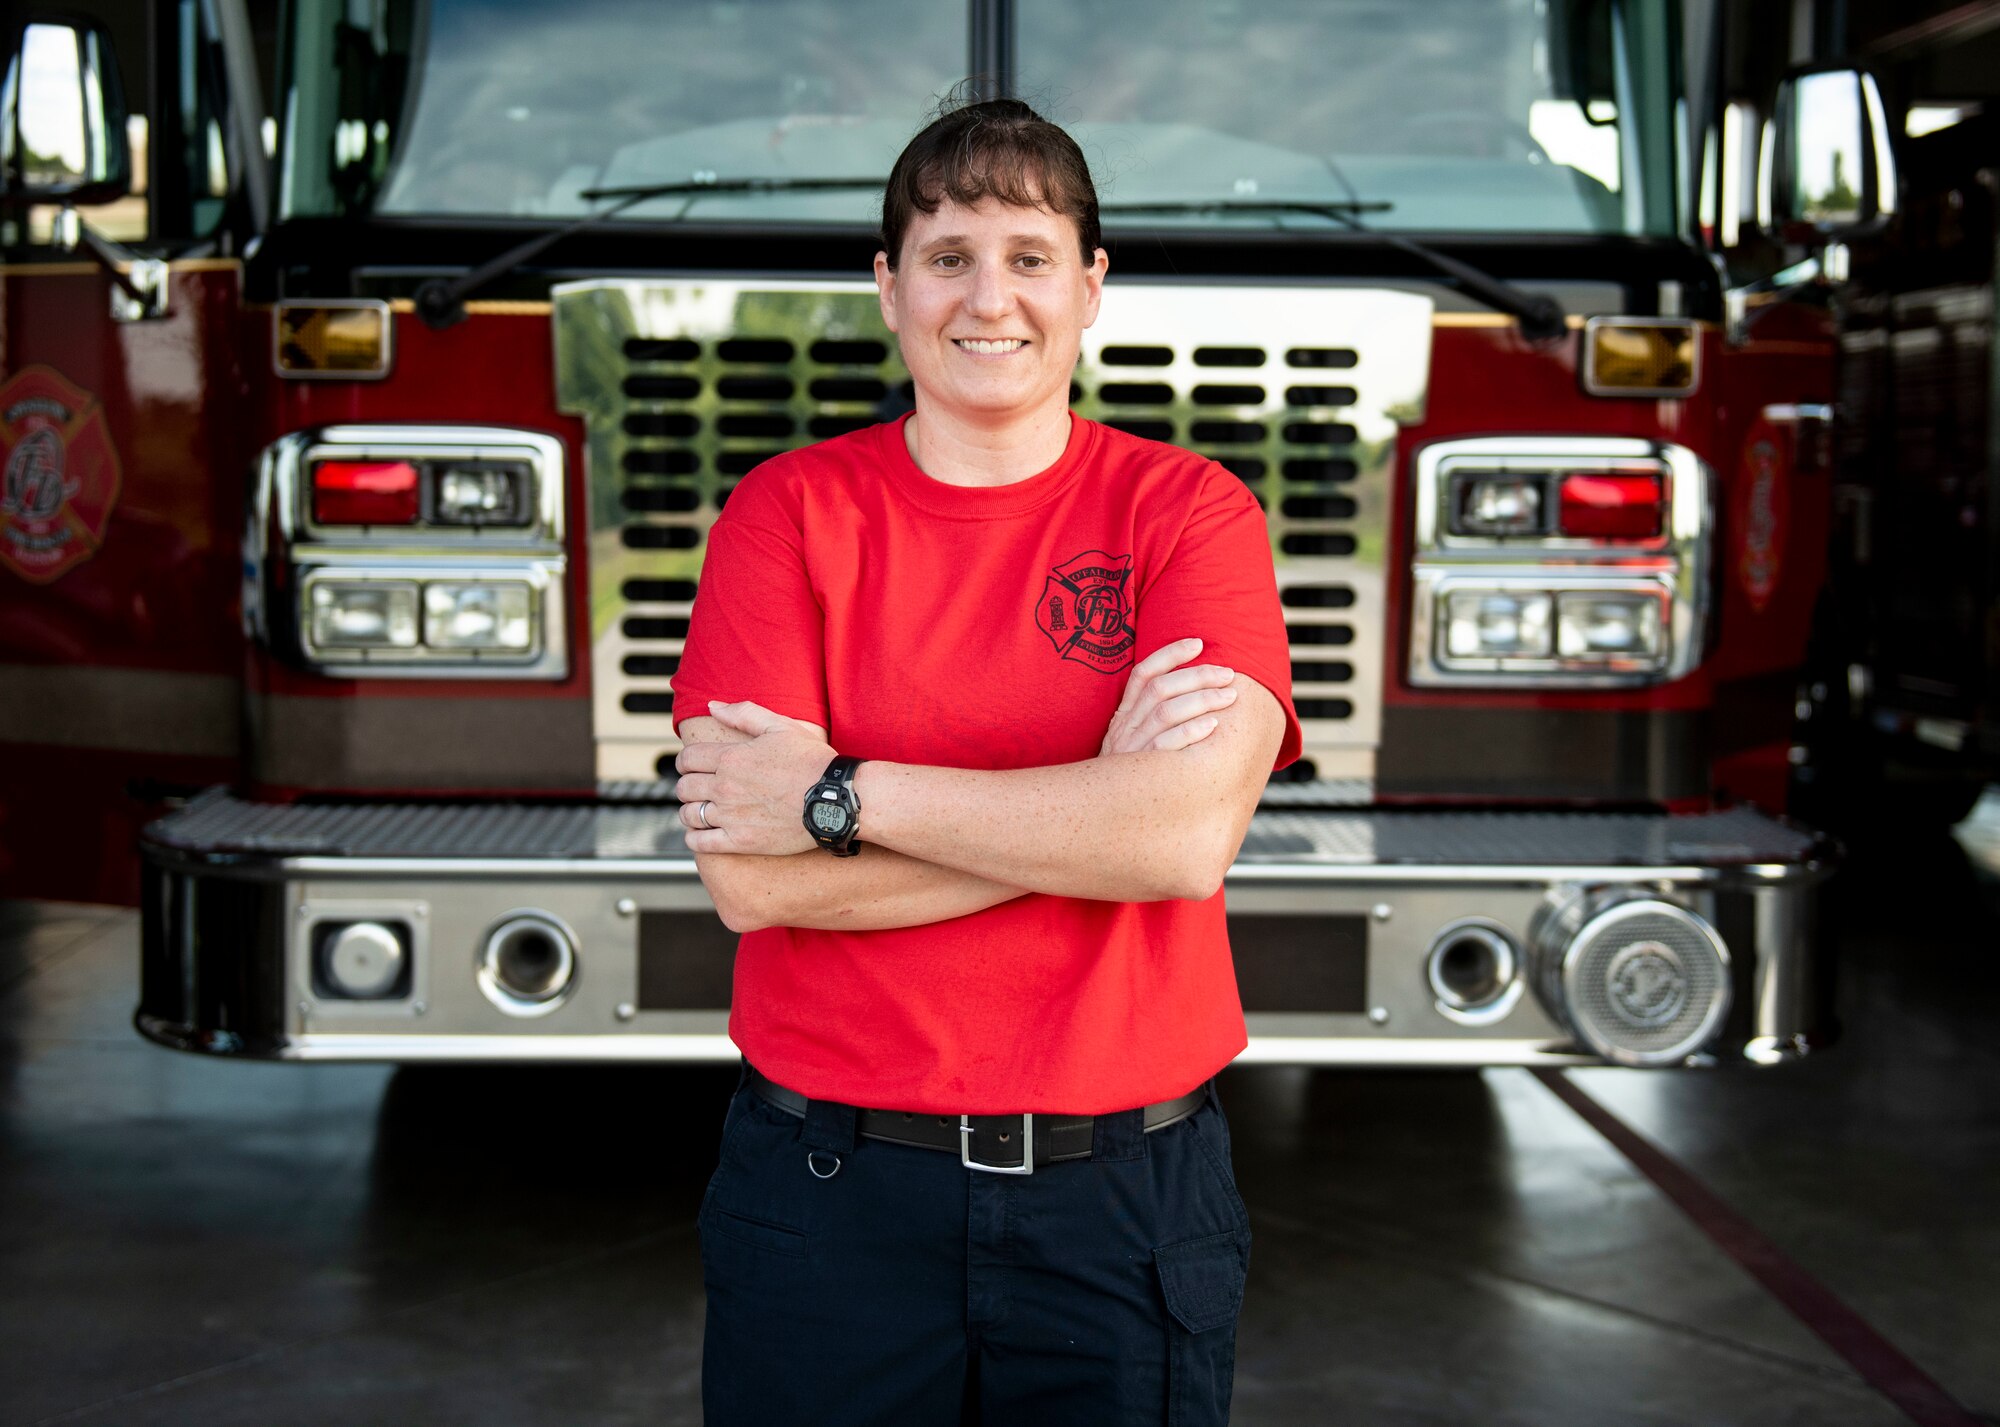 U.S. Army Maj. Nikki Blystone, U.S. Transportation Command logistics officer, stands in front of a fire engine, July 7, 2017, at the O’Fallon Fire Department in O’Fallon, Illinois. Blystone said some of the best moments come from educating young girls about being a firefighter: “I see some of the little girls that come up when we do a truck display and ask them, “Are you going to be a firefighter?’ and the look in their eyes is ‘Oh, I can do that?’ I hope one day that’s not a question.”